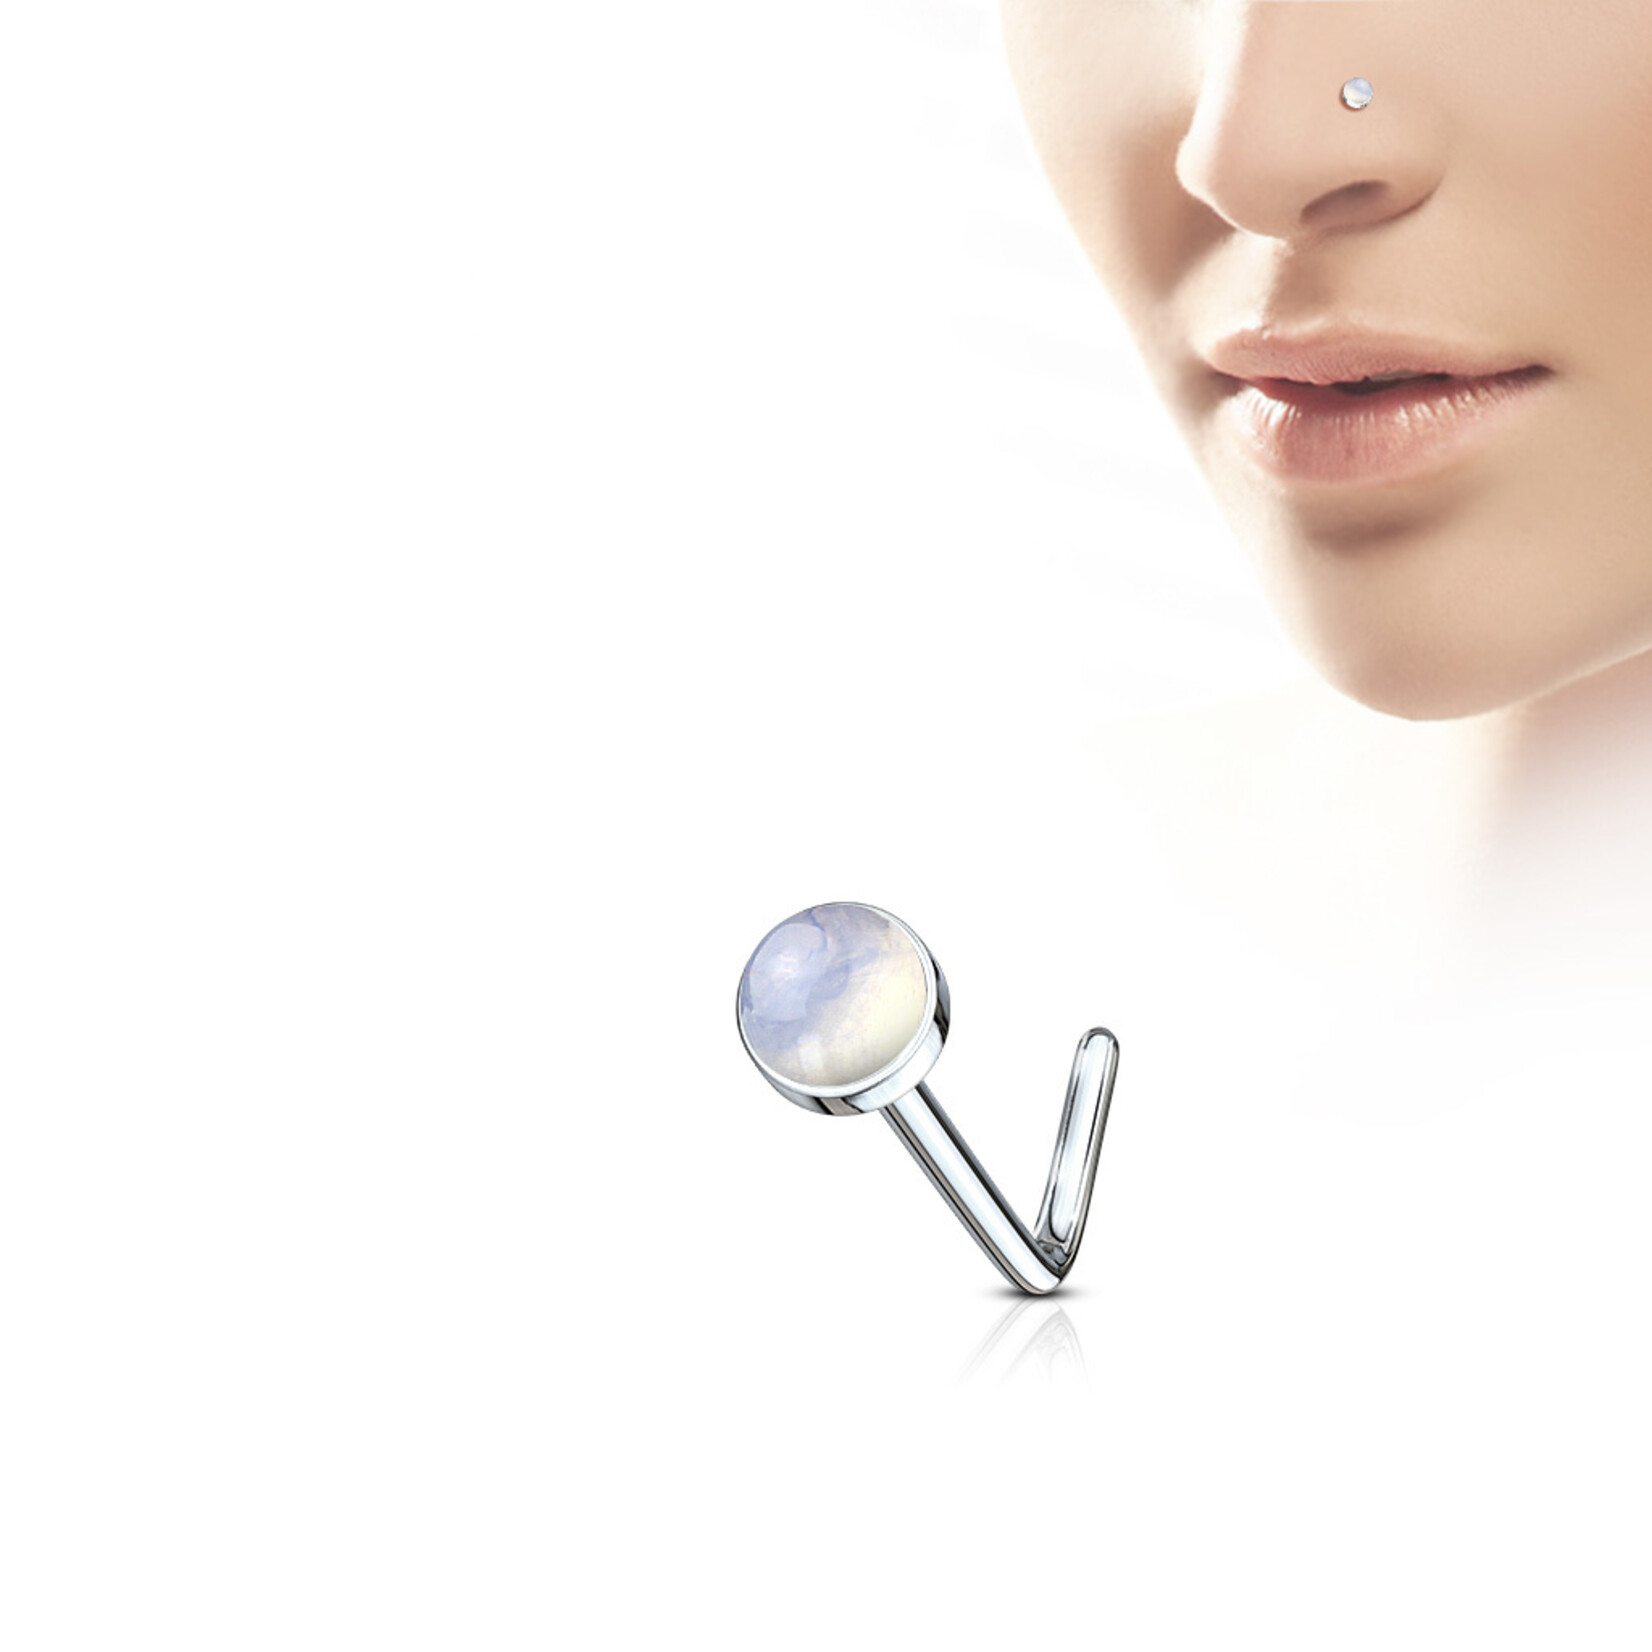 Hollywood Body Jewelry Semi-Precious Stone L Bend Nose Stud Rings